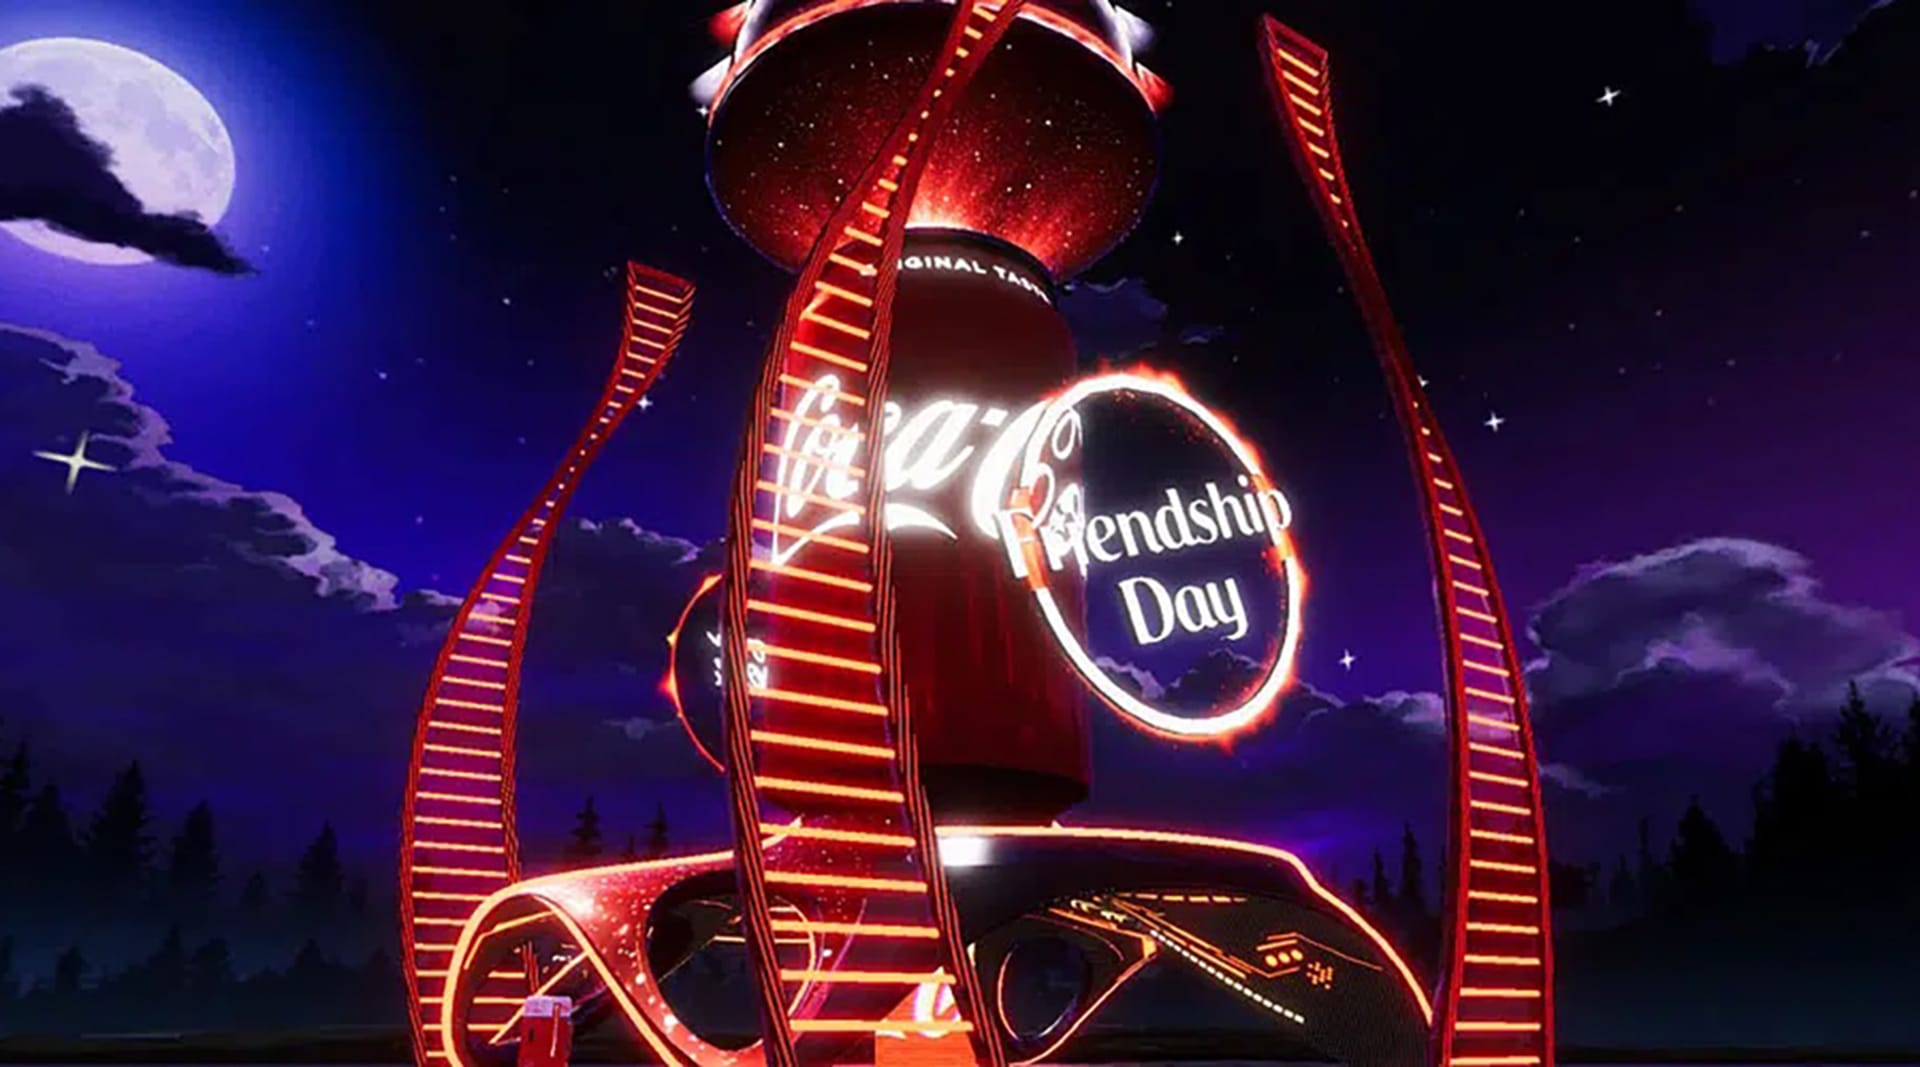 A dark, moonlit starry sky behind a giant red virtual Coca Cola bottle. Red ribbons surround the bottle, and a circular logo that reads "Friendship Day" sits in front and behind the bottle.